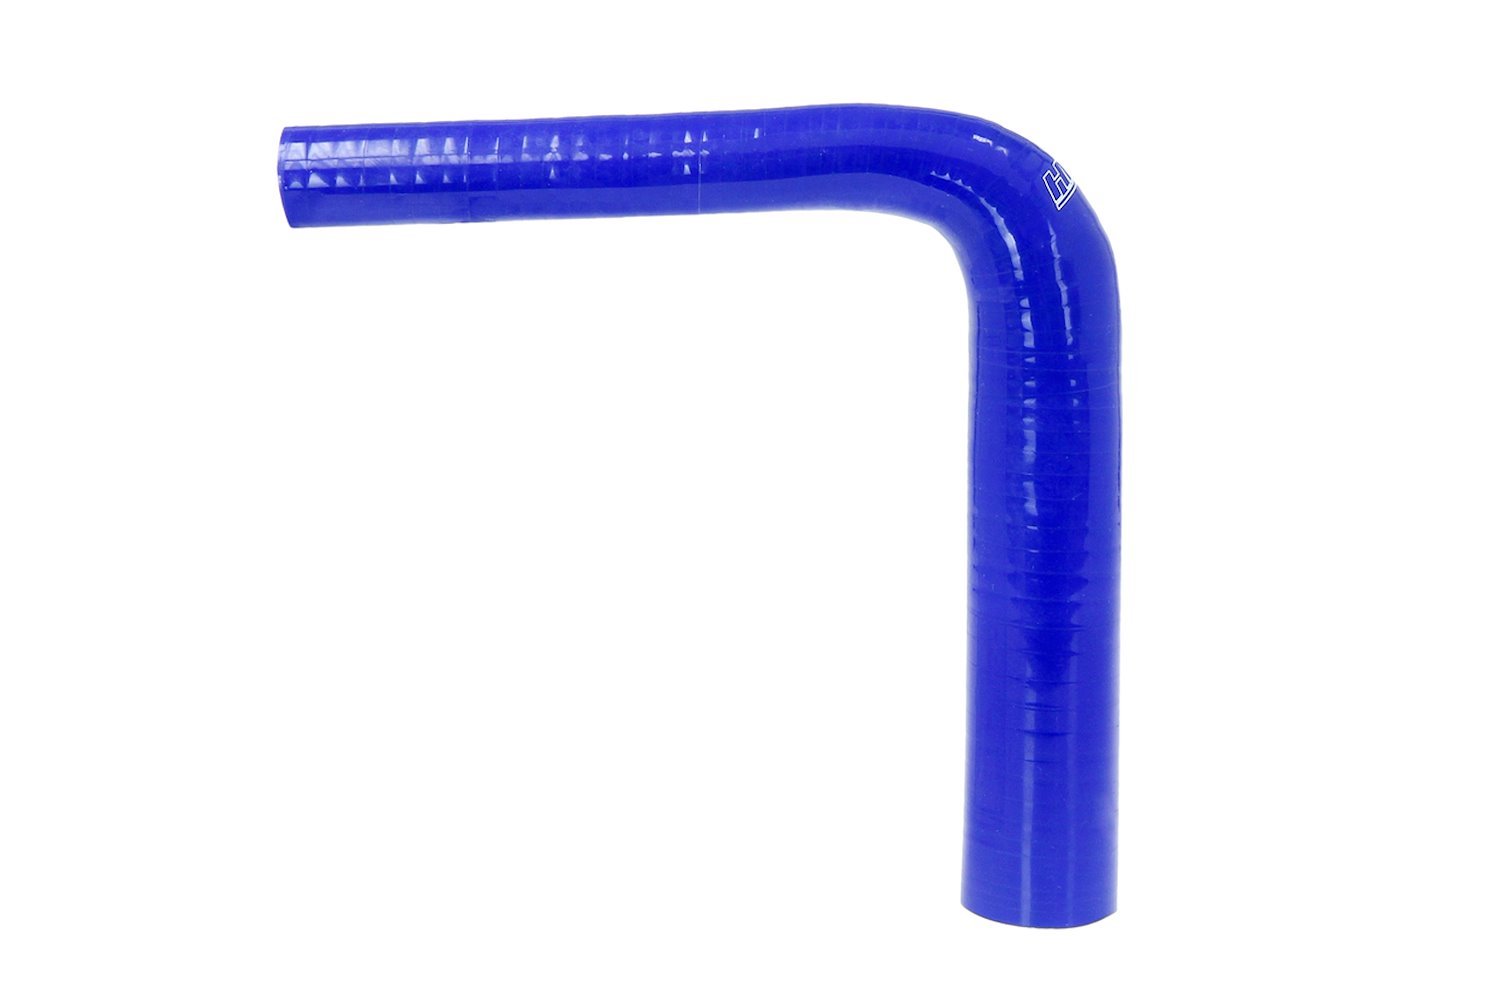 HTSER90-100-175-BLUE Silicone 90-Degree Elbow Hose, High-Temp 4-Ply Reinforced, 1 in. - 1-3/4 in. ID, Blue